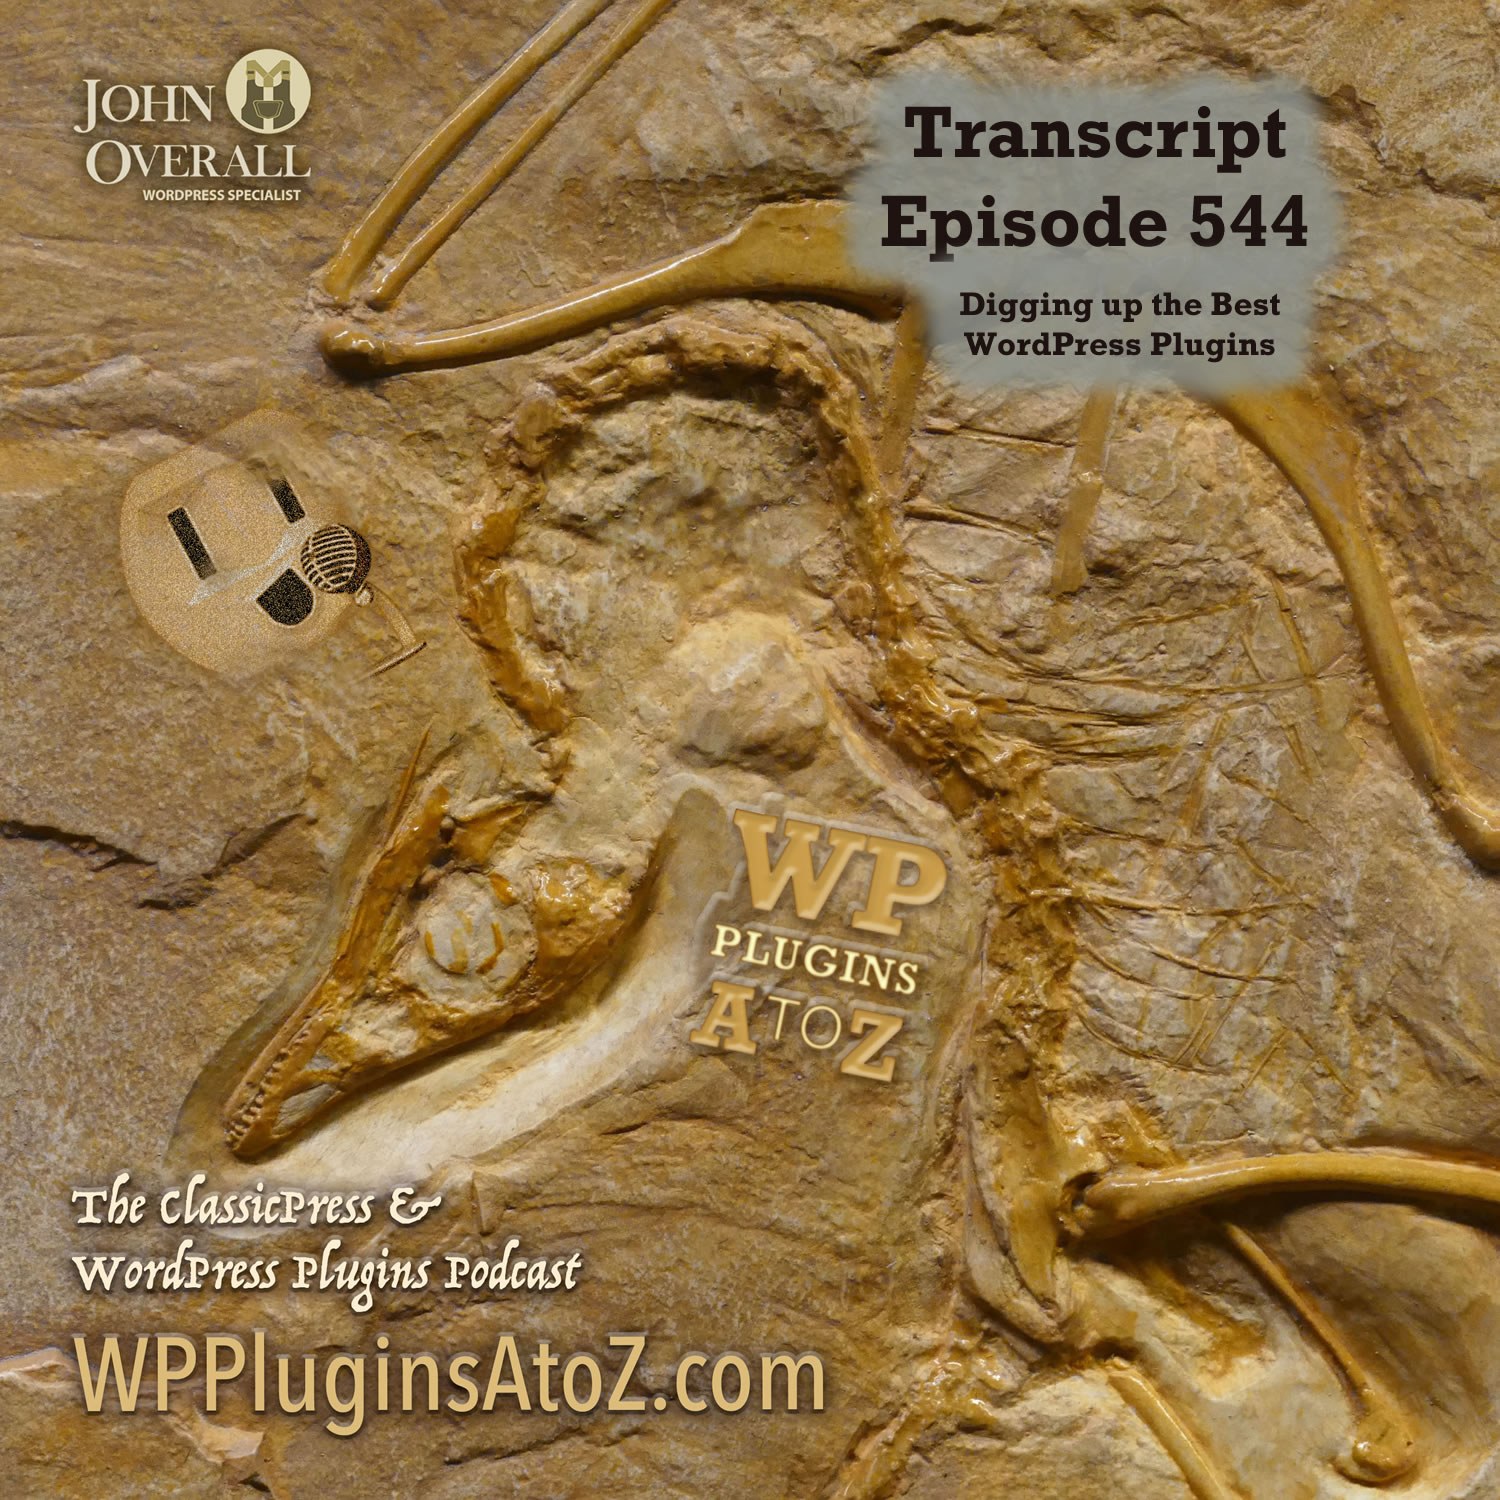 Transcript for Episode 544 and we have plugins for Sticky Admin, Puzzles, Escaping, Testing Chakras, Slidey Review, Ordering tests... and ClassicPress Options. It's all coming up on WordPress Plugins A-Z!